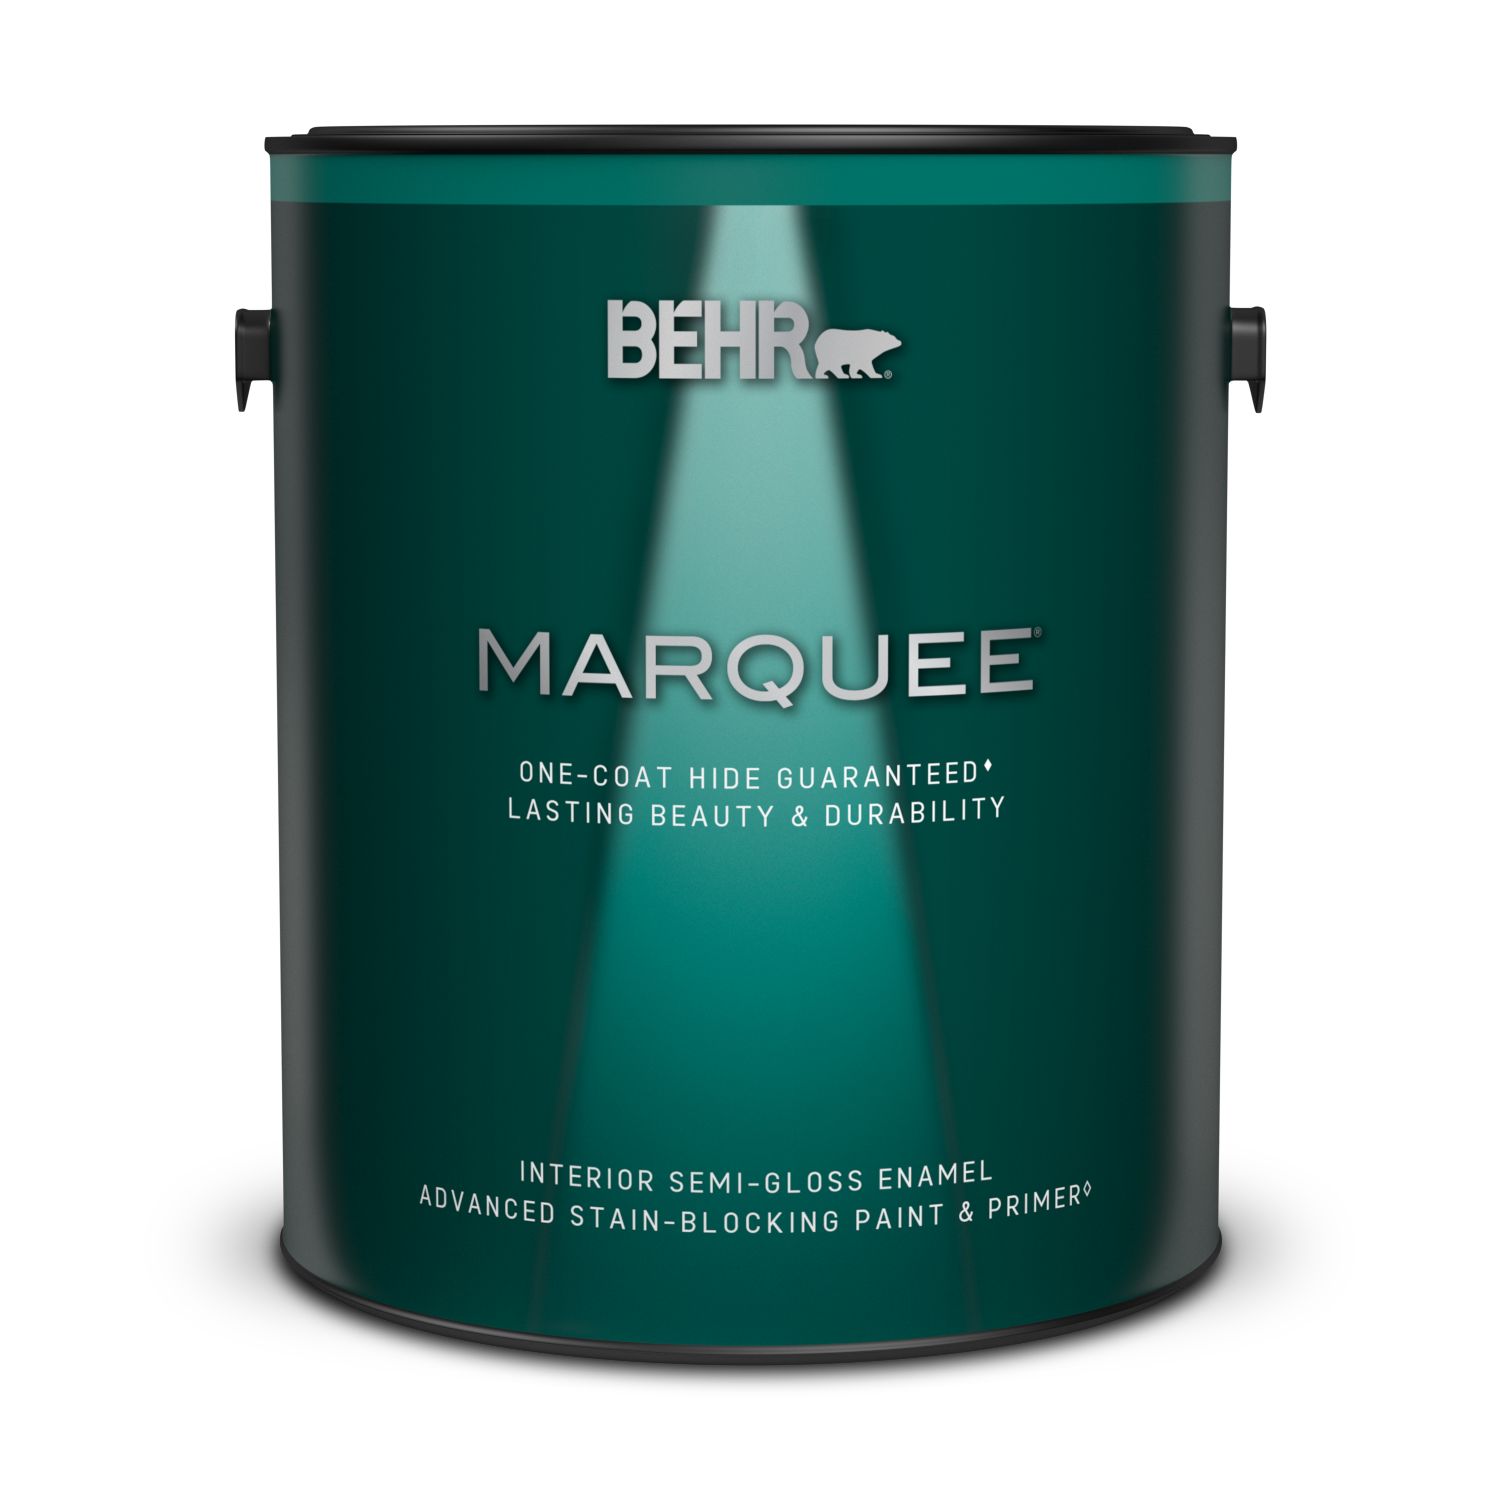 1 gallon can of Marquee Interior Semi-Gloss Enamel Paint